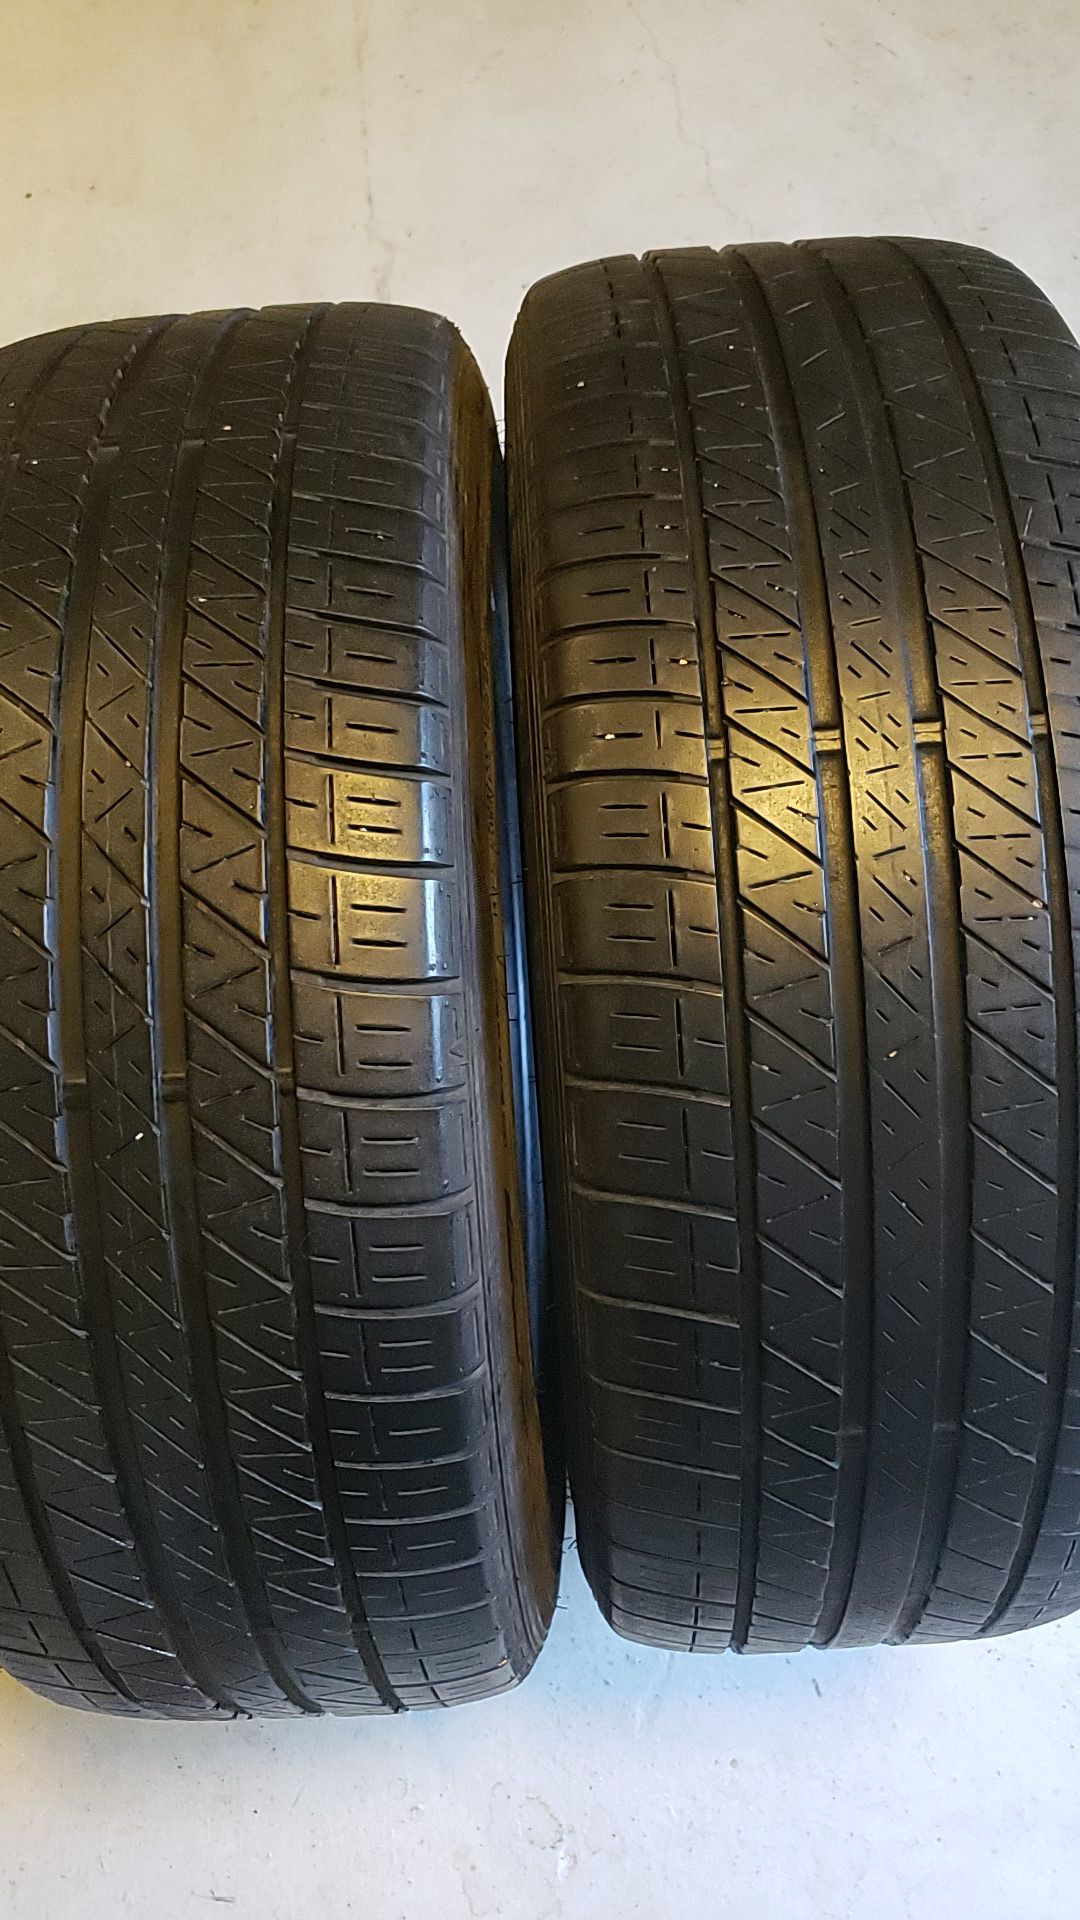 Dunlop in good condition 2 tires 225 45 19 good tread